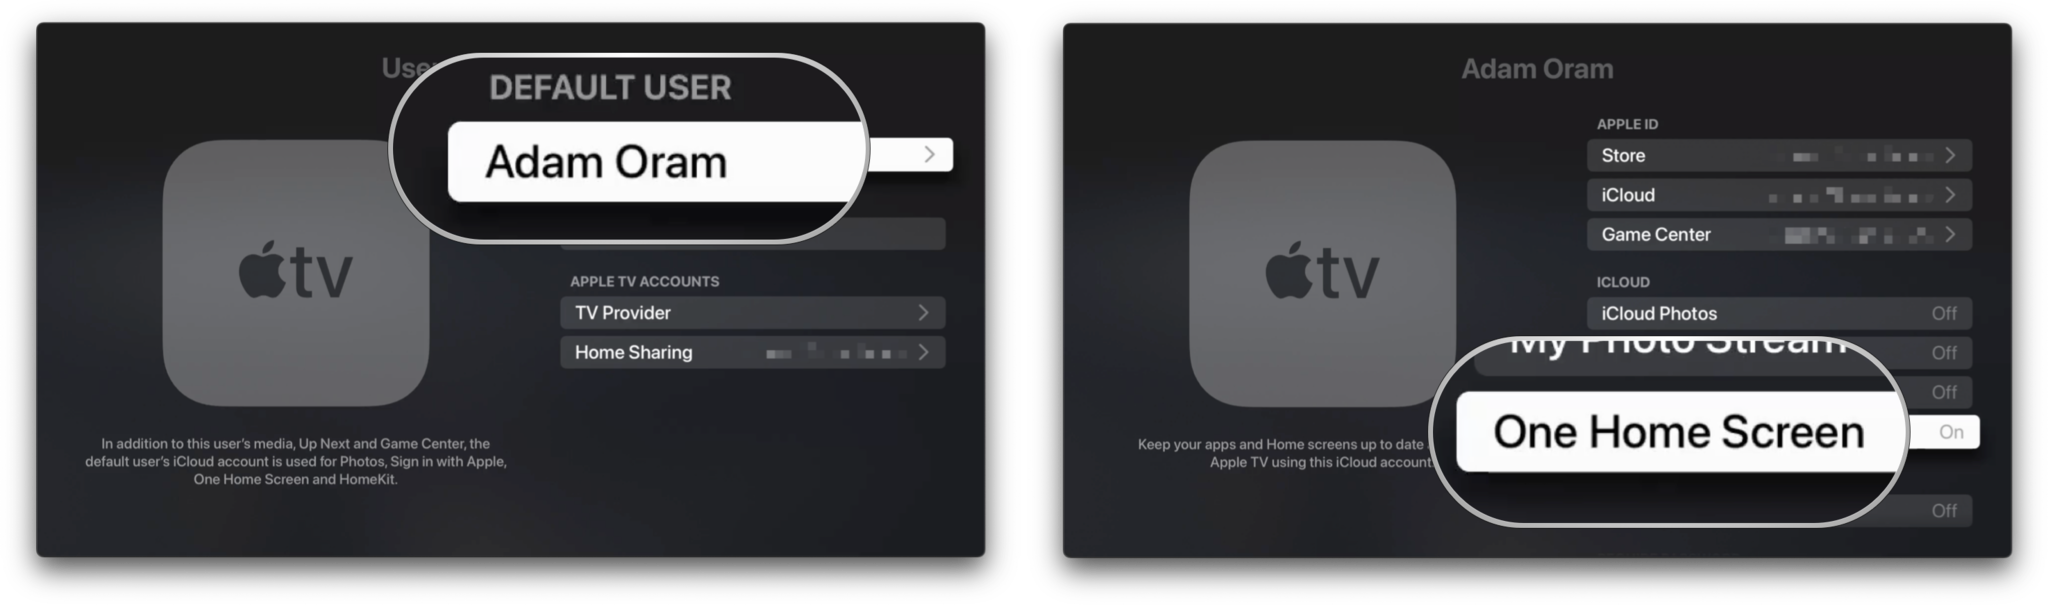 Enable One Home Screen on Apple TV: Click on your name under Default User, click on One Home Screen to turn it on.